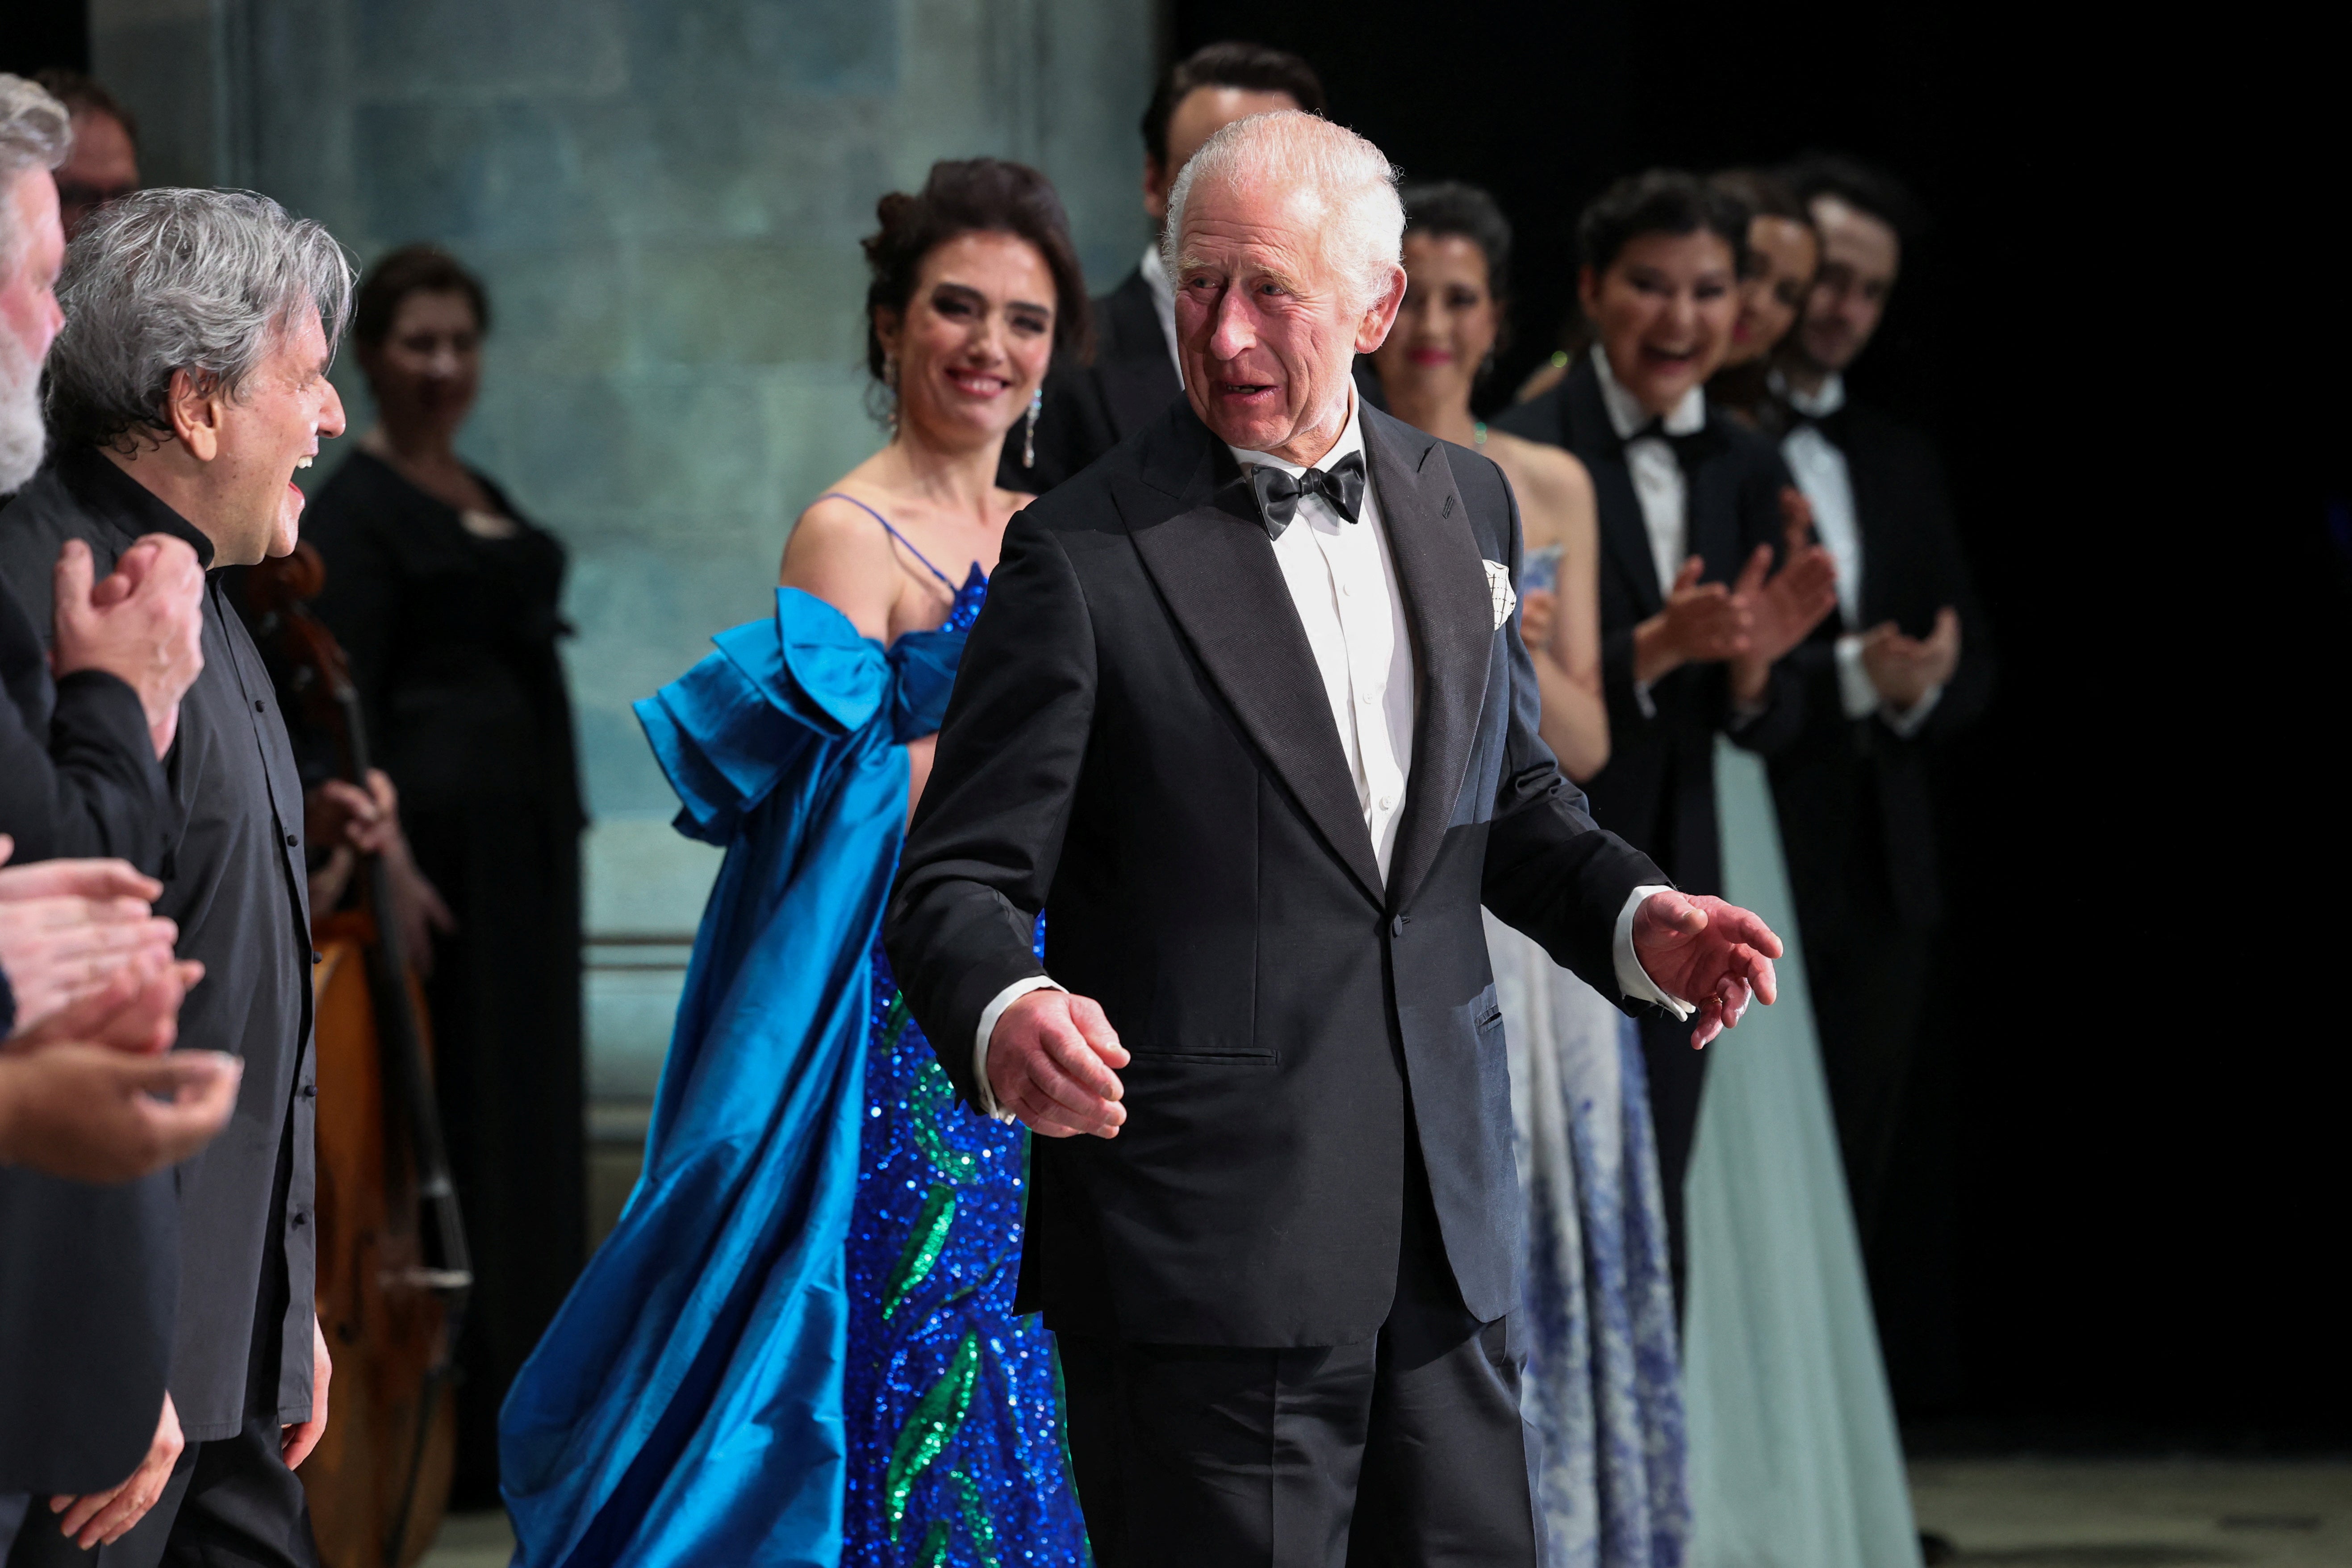 King Charles made a surprise appearance at the Royal Opera House last week